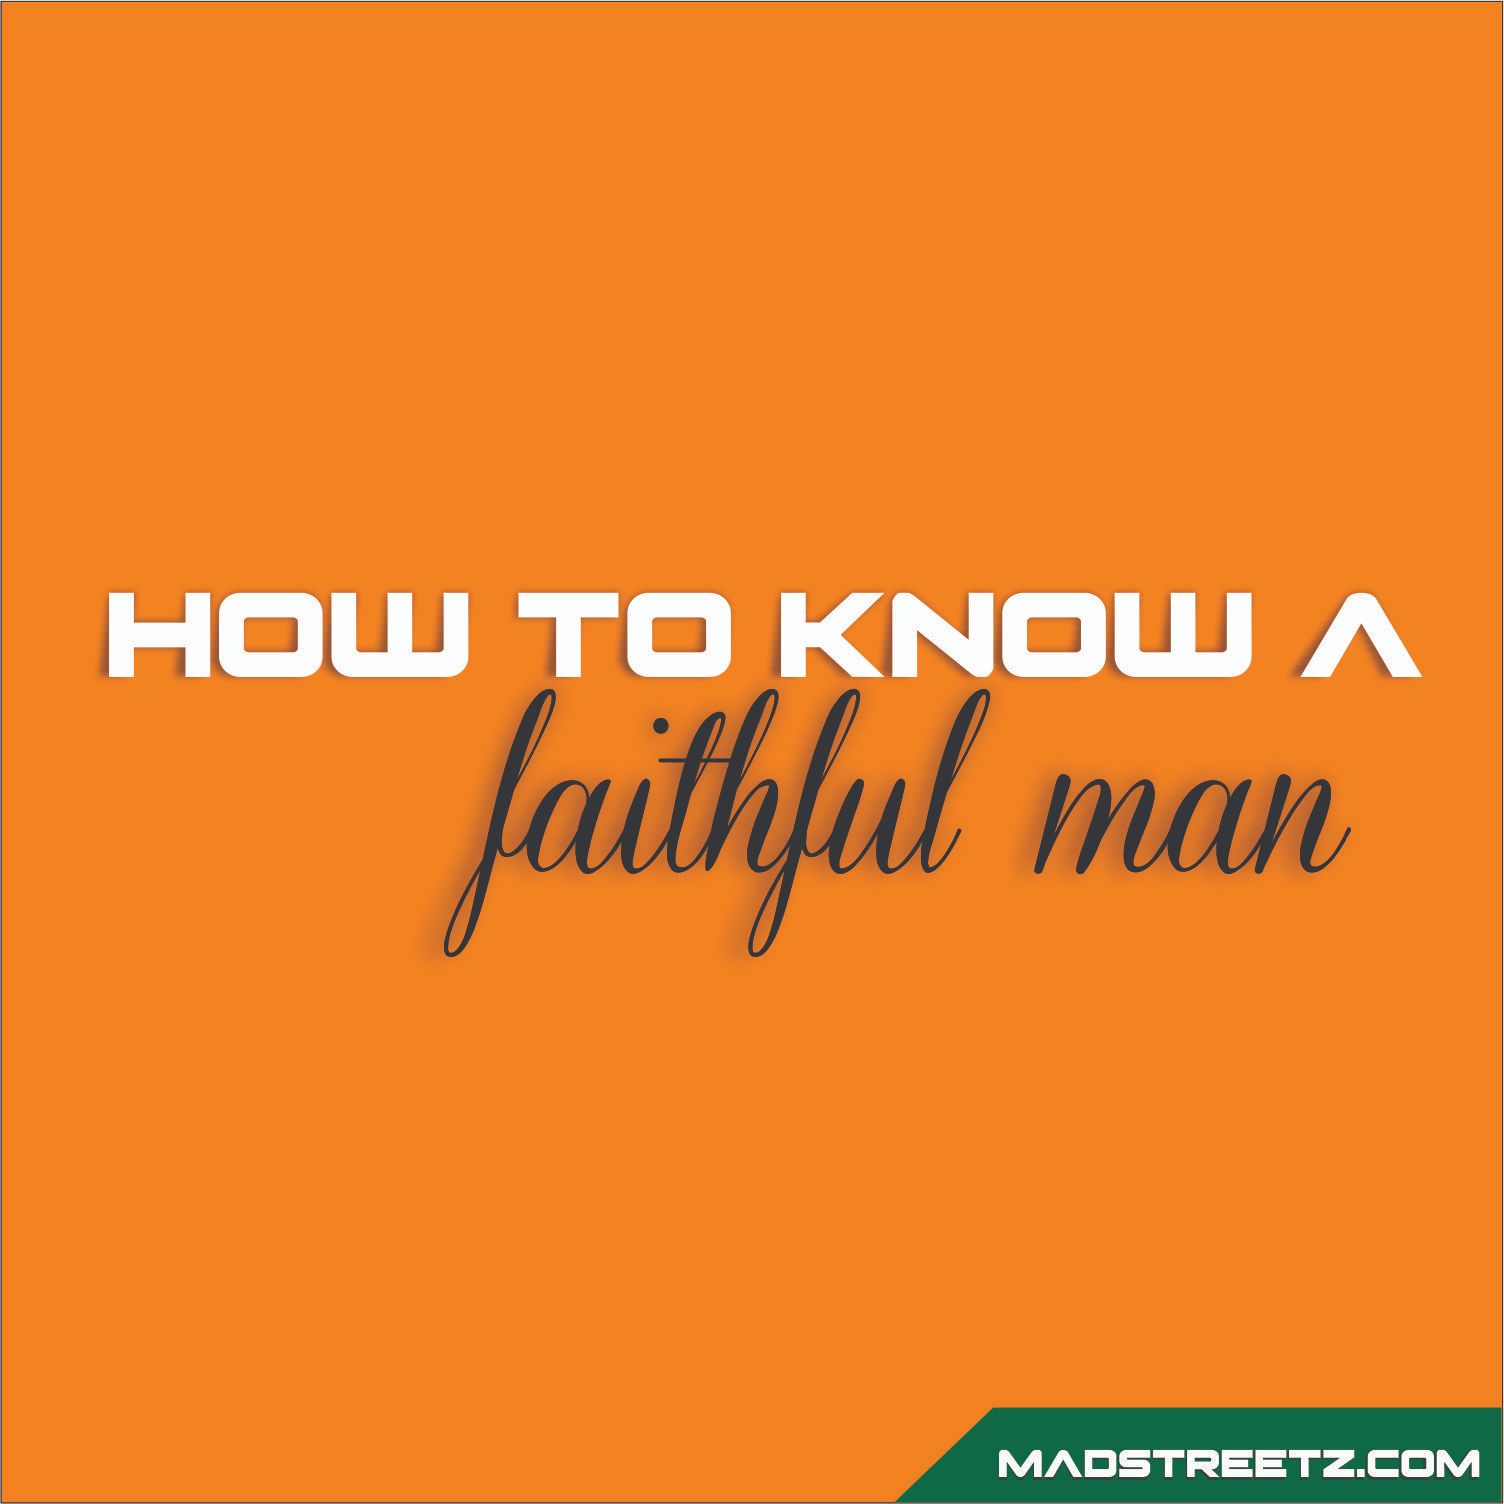 Relationship: How To Know A Faithful Man